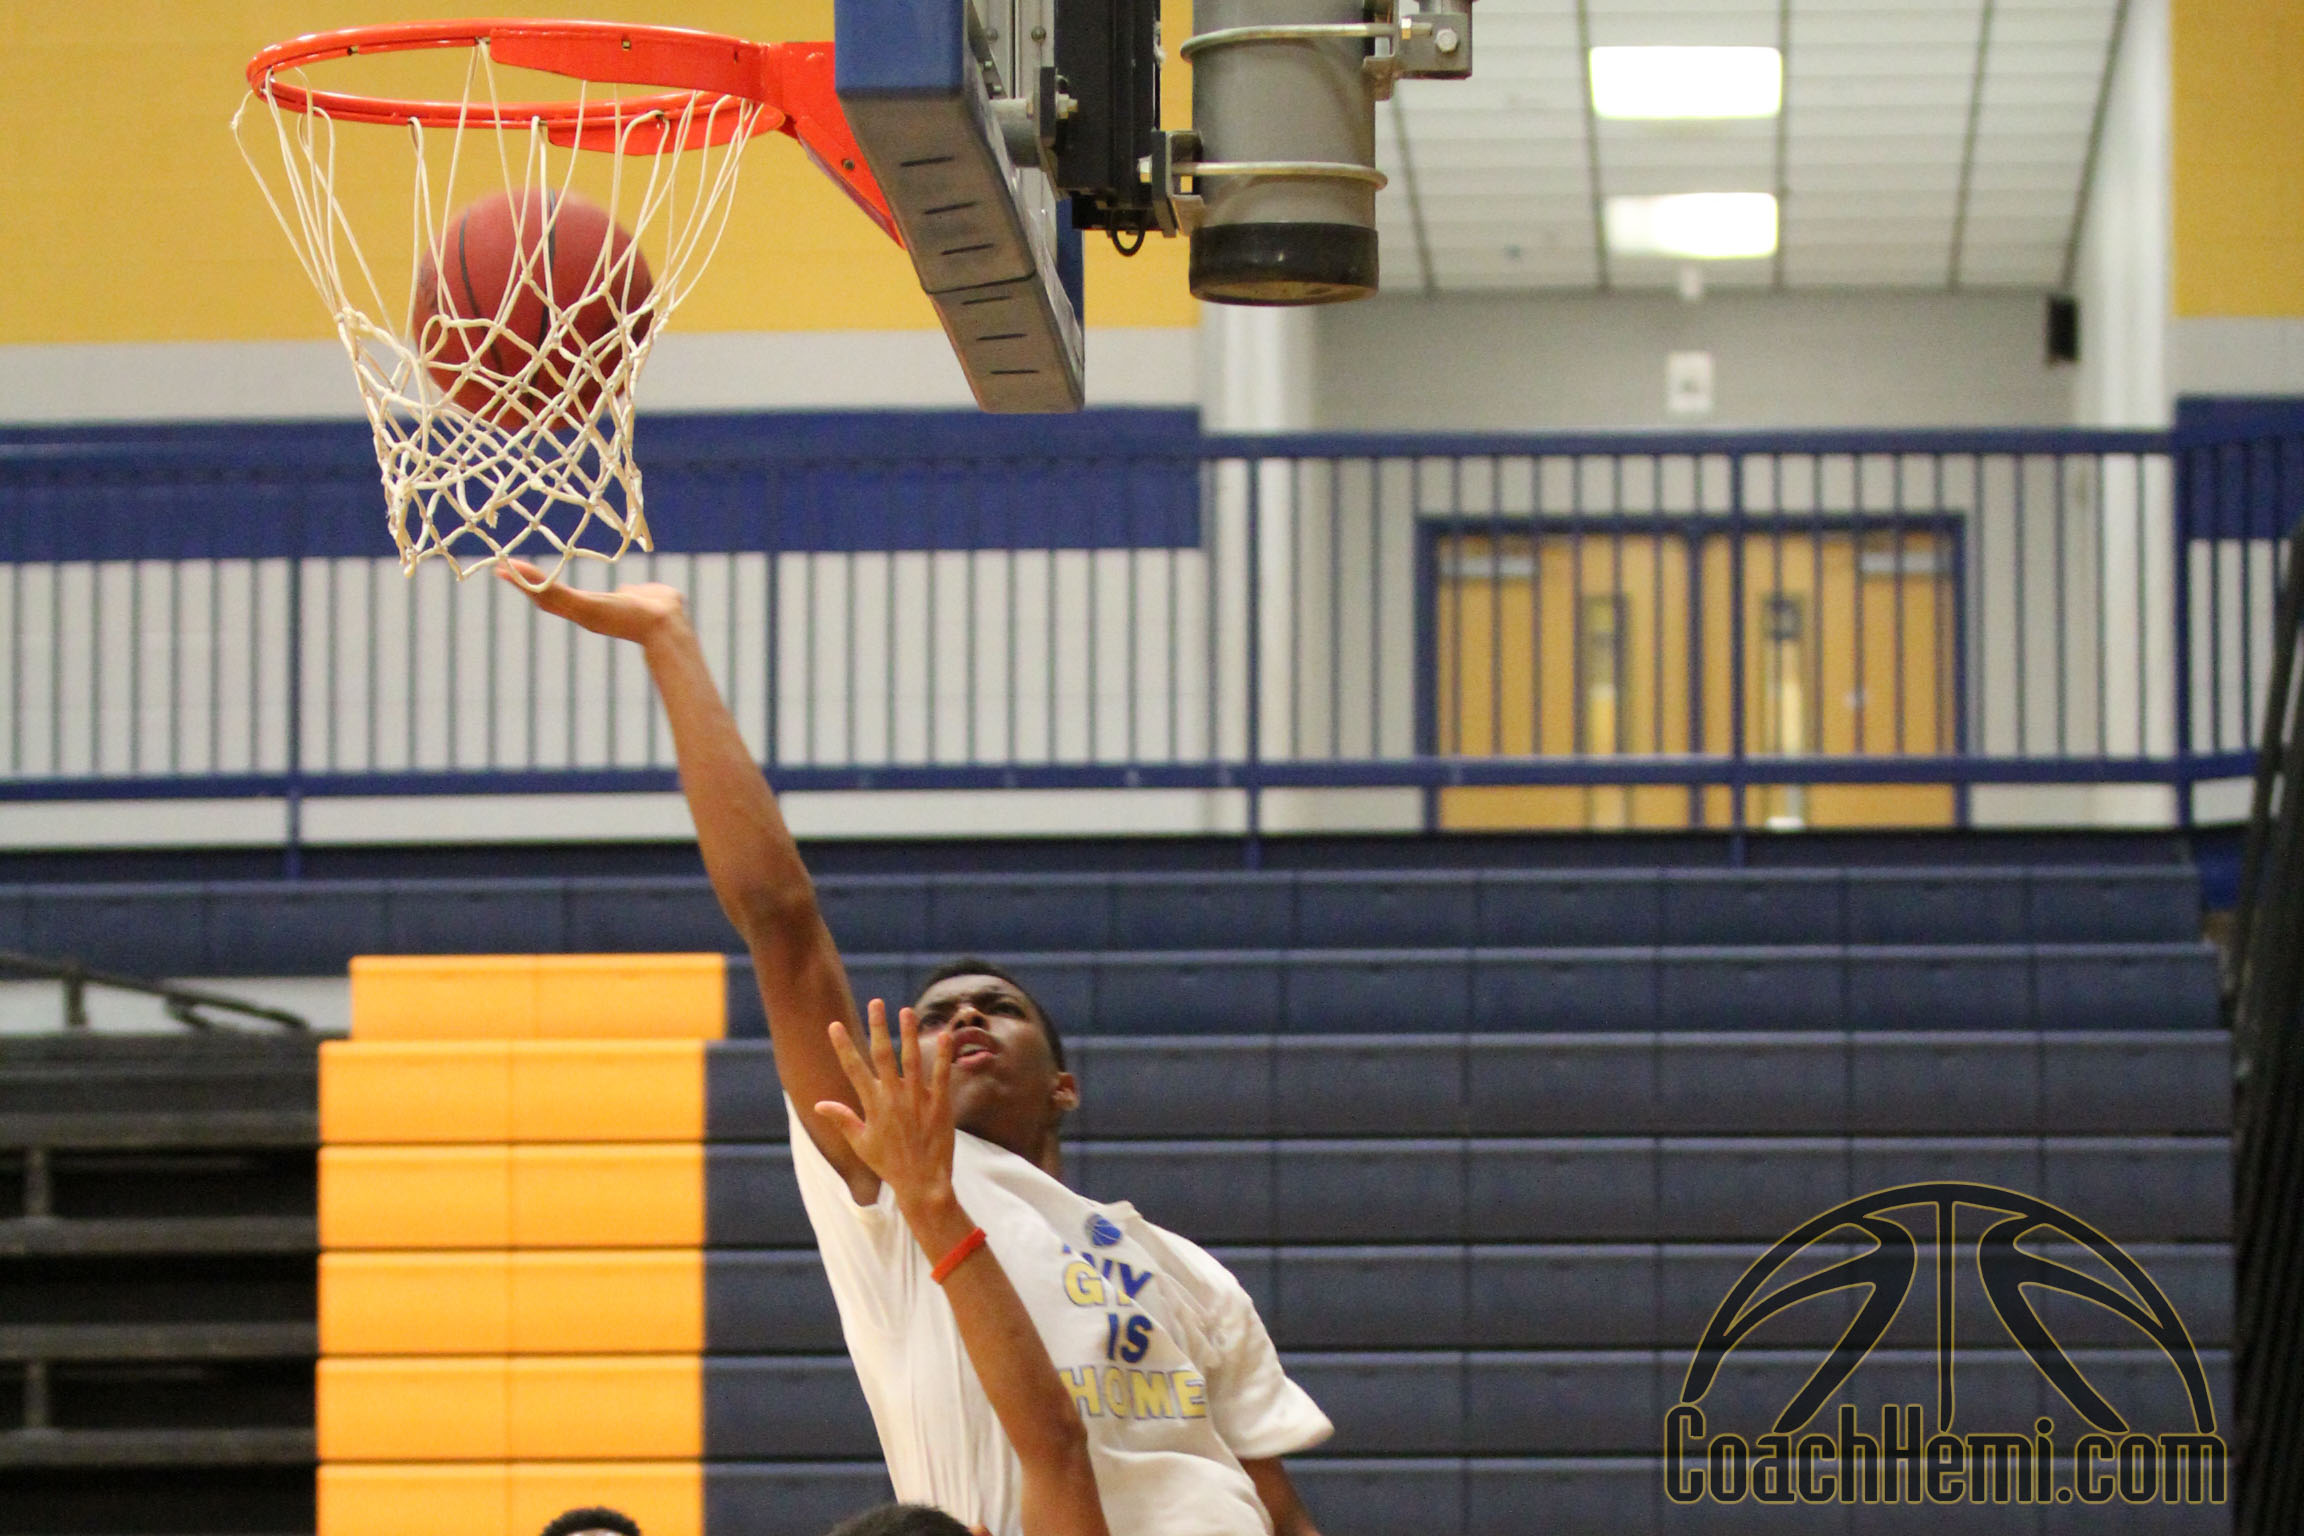 #OTRHoopsReport: Coach Hemi Fall Workout Player Evaluations - October 14, 2014